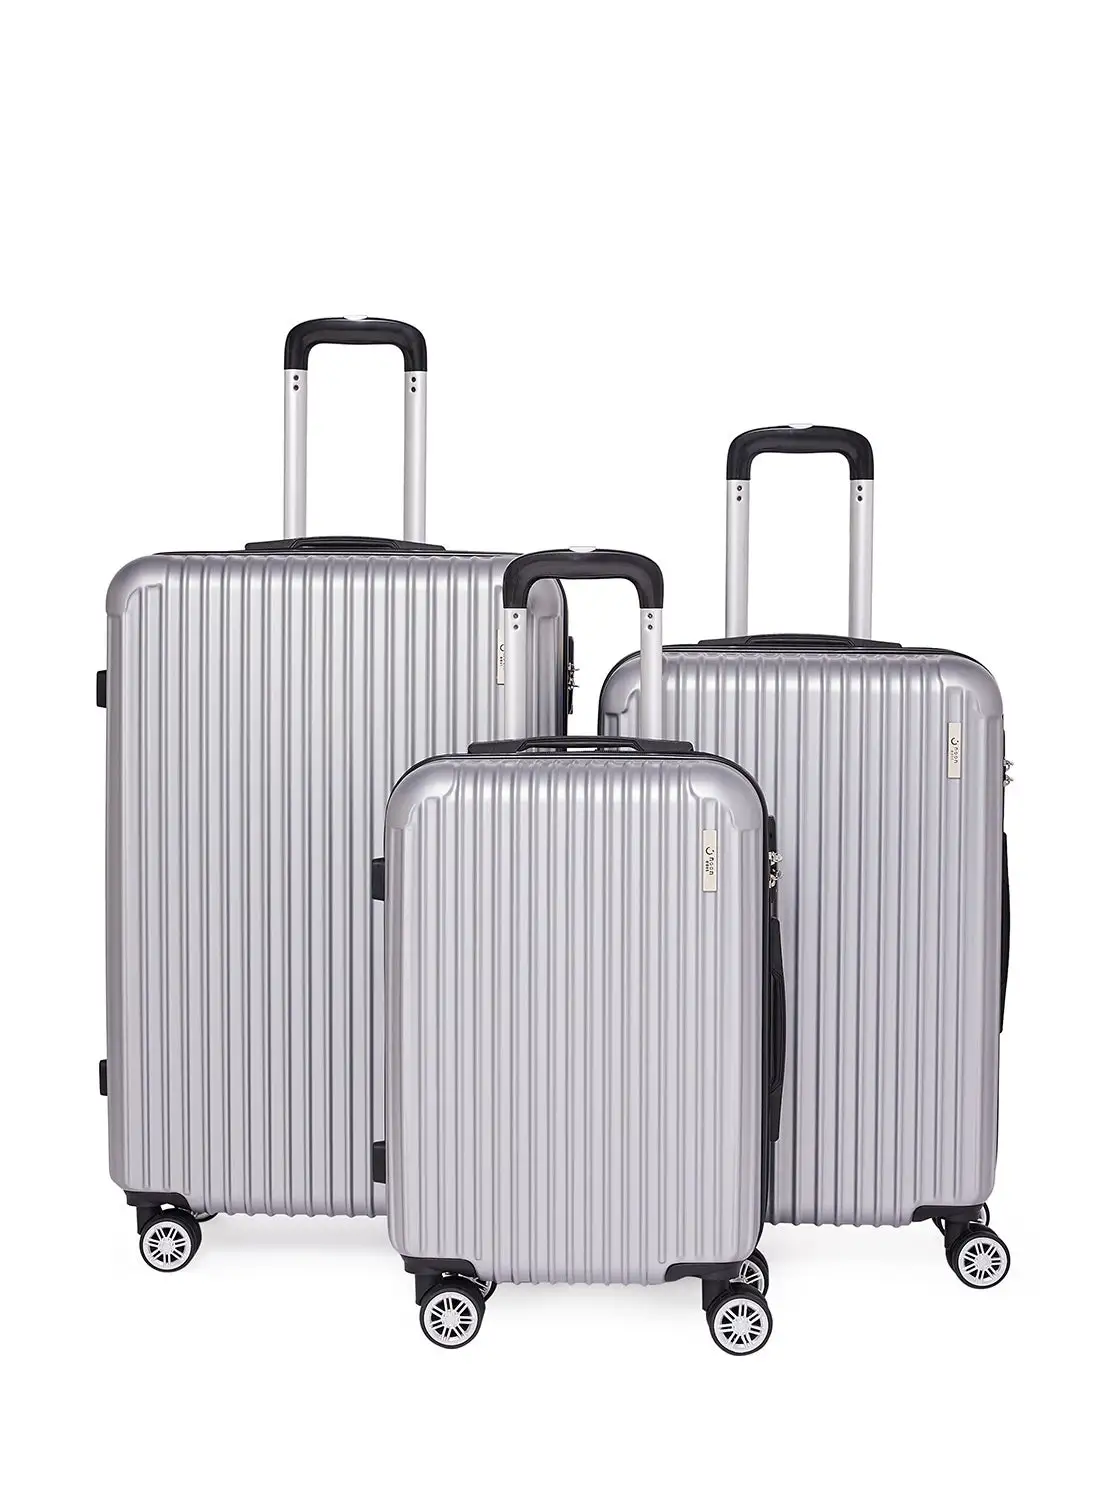 Noon East 3-Piece ABS Hardside Spinner Iron Rod Luggage Trolley Set With TSA Lock 20/24/28 Inch Silver